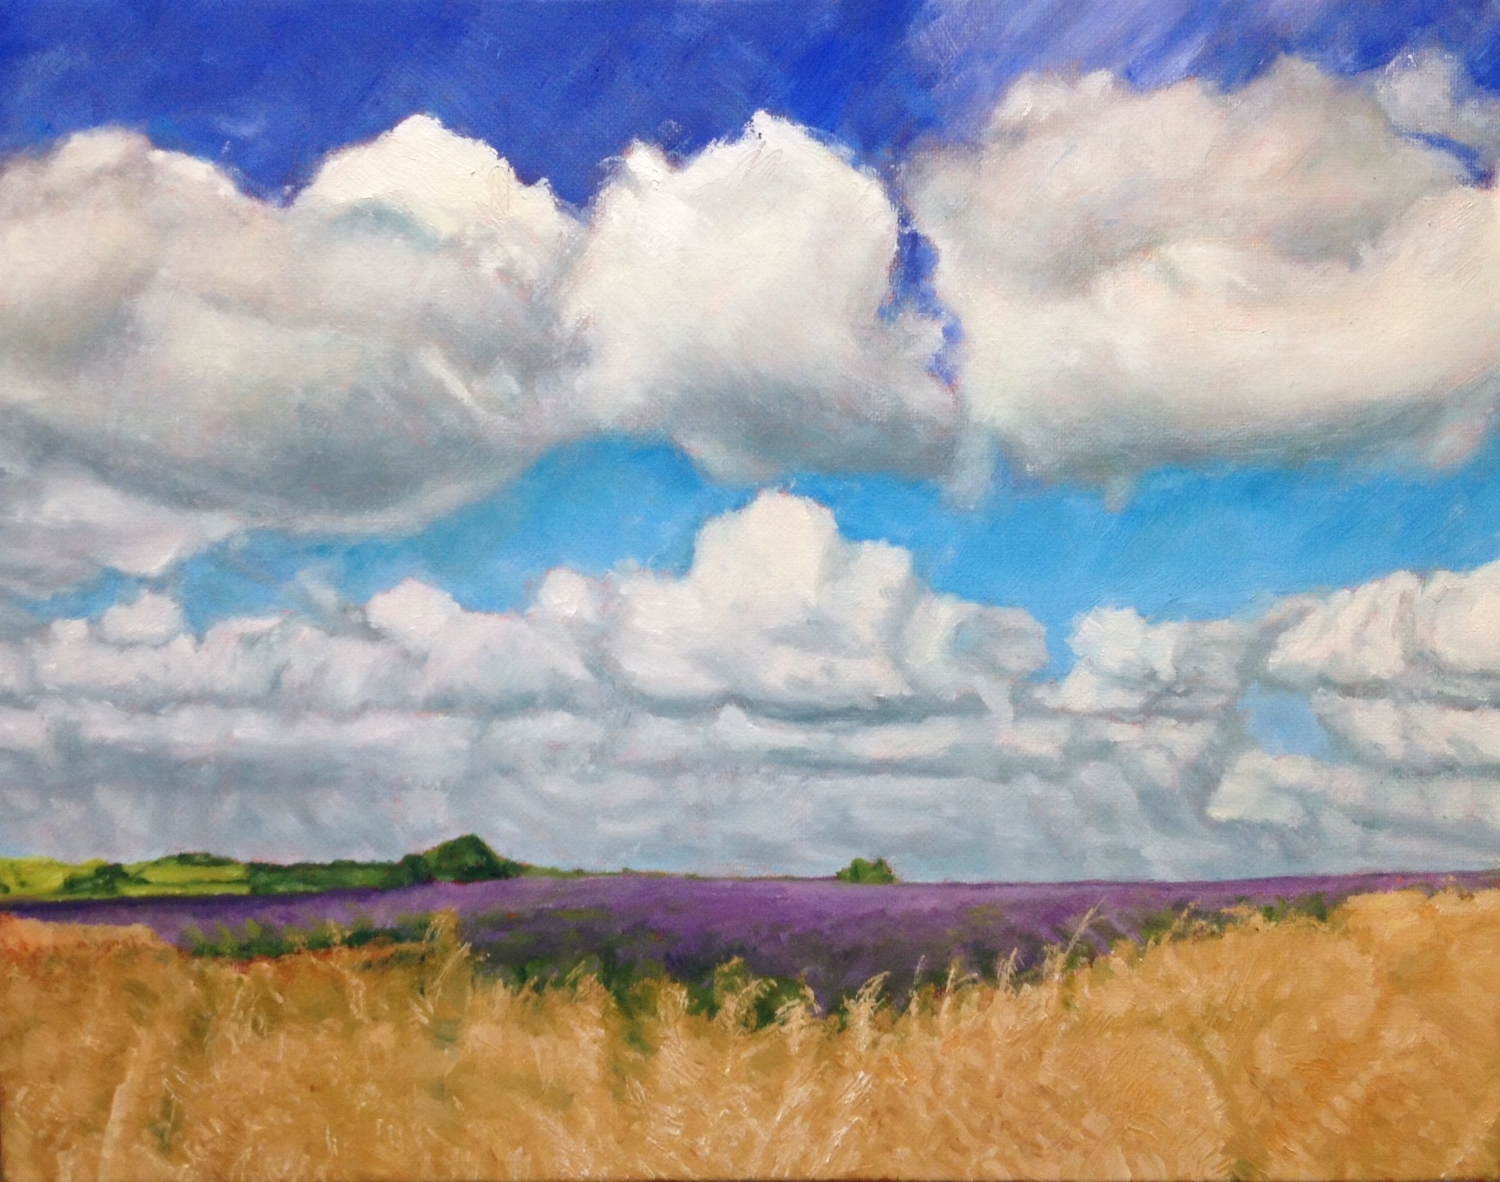 Completed lavender fields